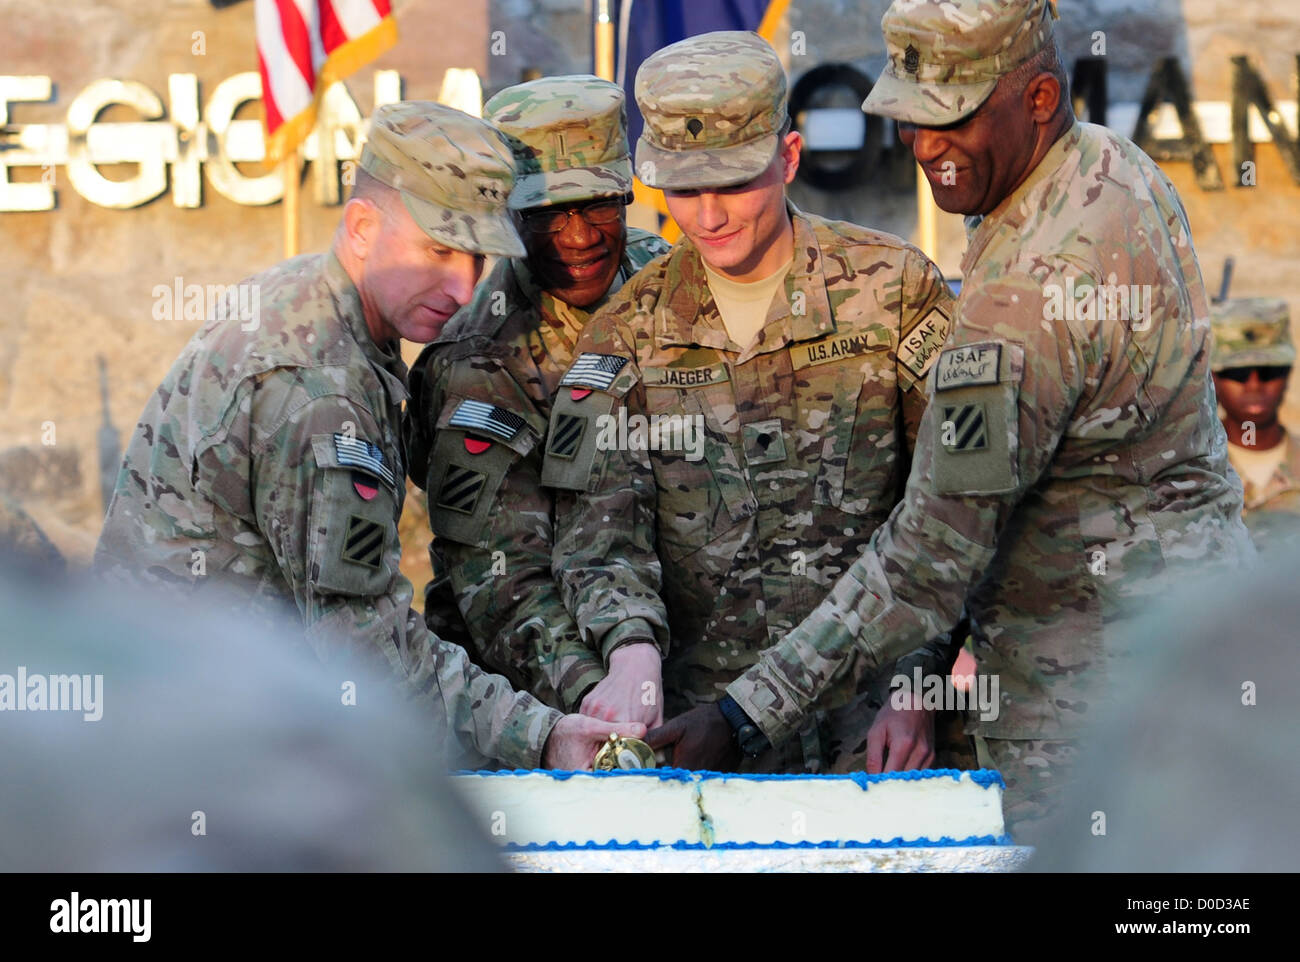 From left, Maj. Gen. Robert â€œAbeâ€ Abrams, 3rd Infantry Division and Regional Command (South) commanding general, Chief Warrant Officer 5 Raymond Noble, Spc. James Jaeger, and Command Sgt. Maj. Edd Watson, 3rd Infantry Division and Regional Command (So Stock Photo